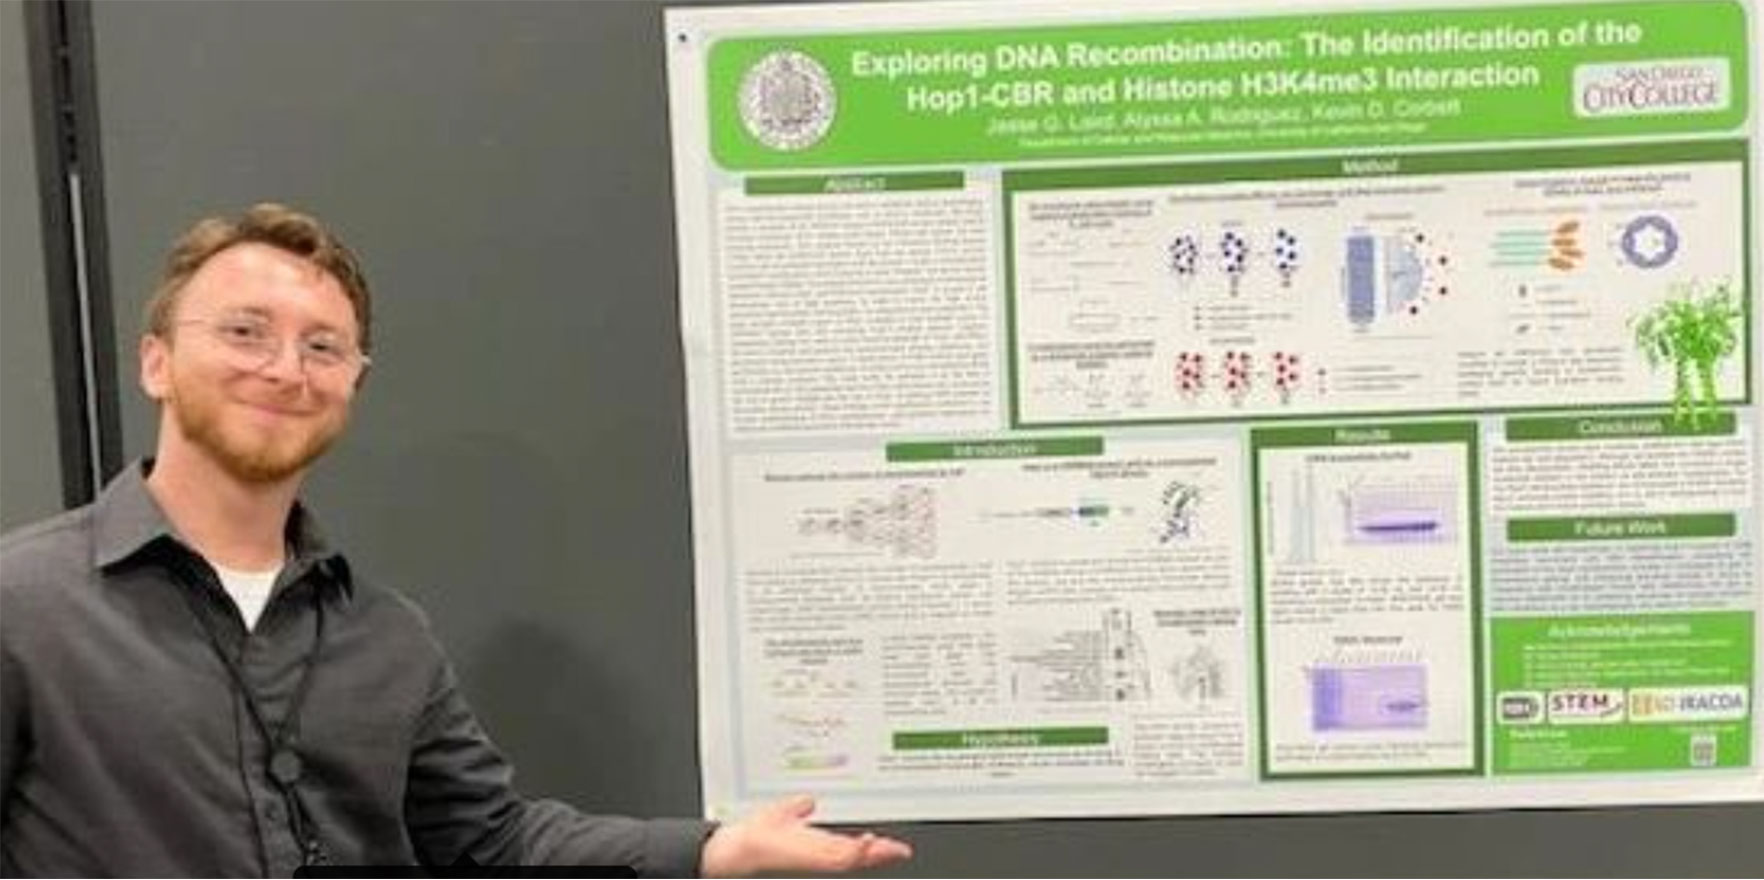 STEM Pathways and IRACDA scholar from San Diego City College presents their research poster at ABRCMS 2023. The poster is green and white and is about Exploring DNA Recombination: The identification of the Hop1-CBR and Histone H3k4me3 Interaction. They are wearing a black button down shirt with a white undershirt underneath. Has glasses and light reddish hair and a beard.